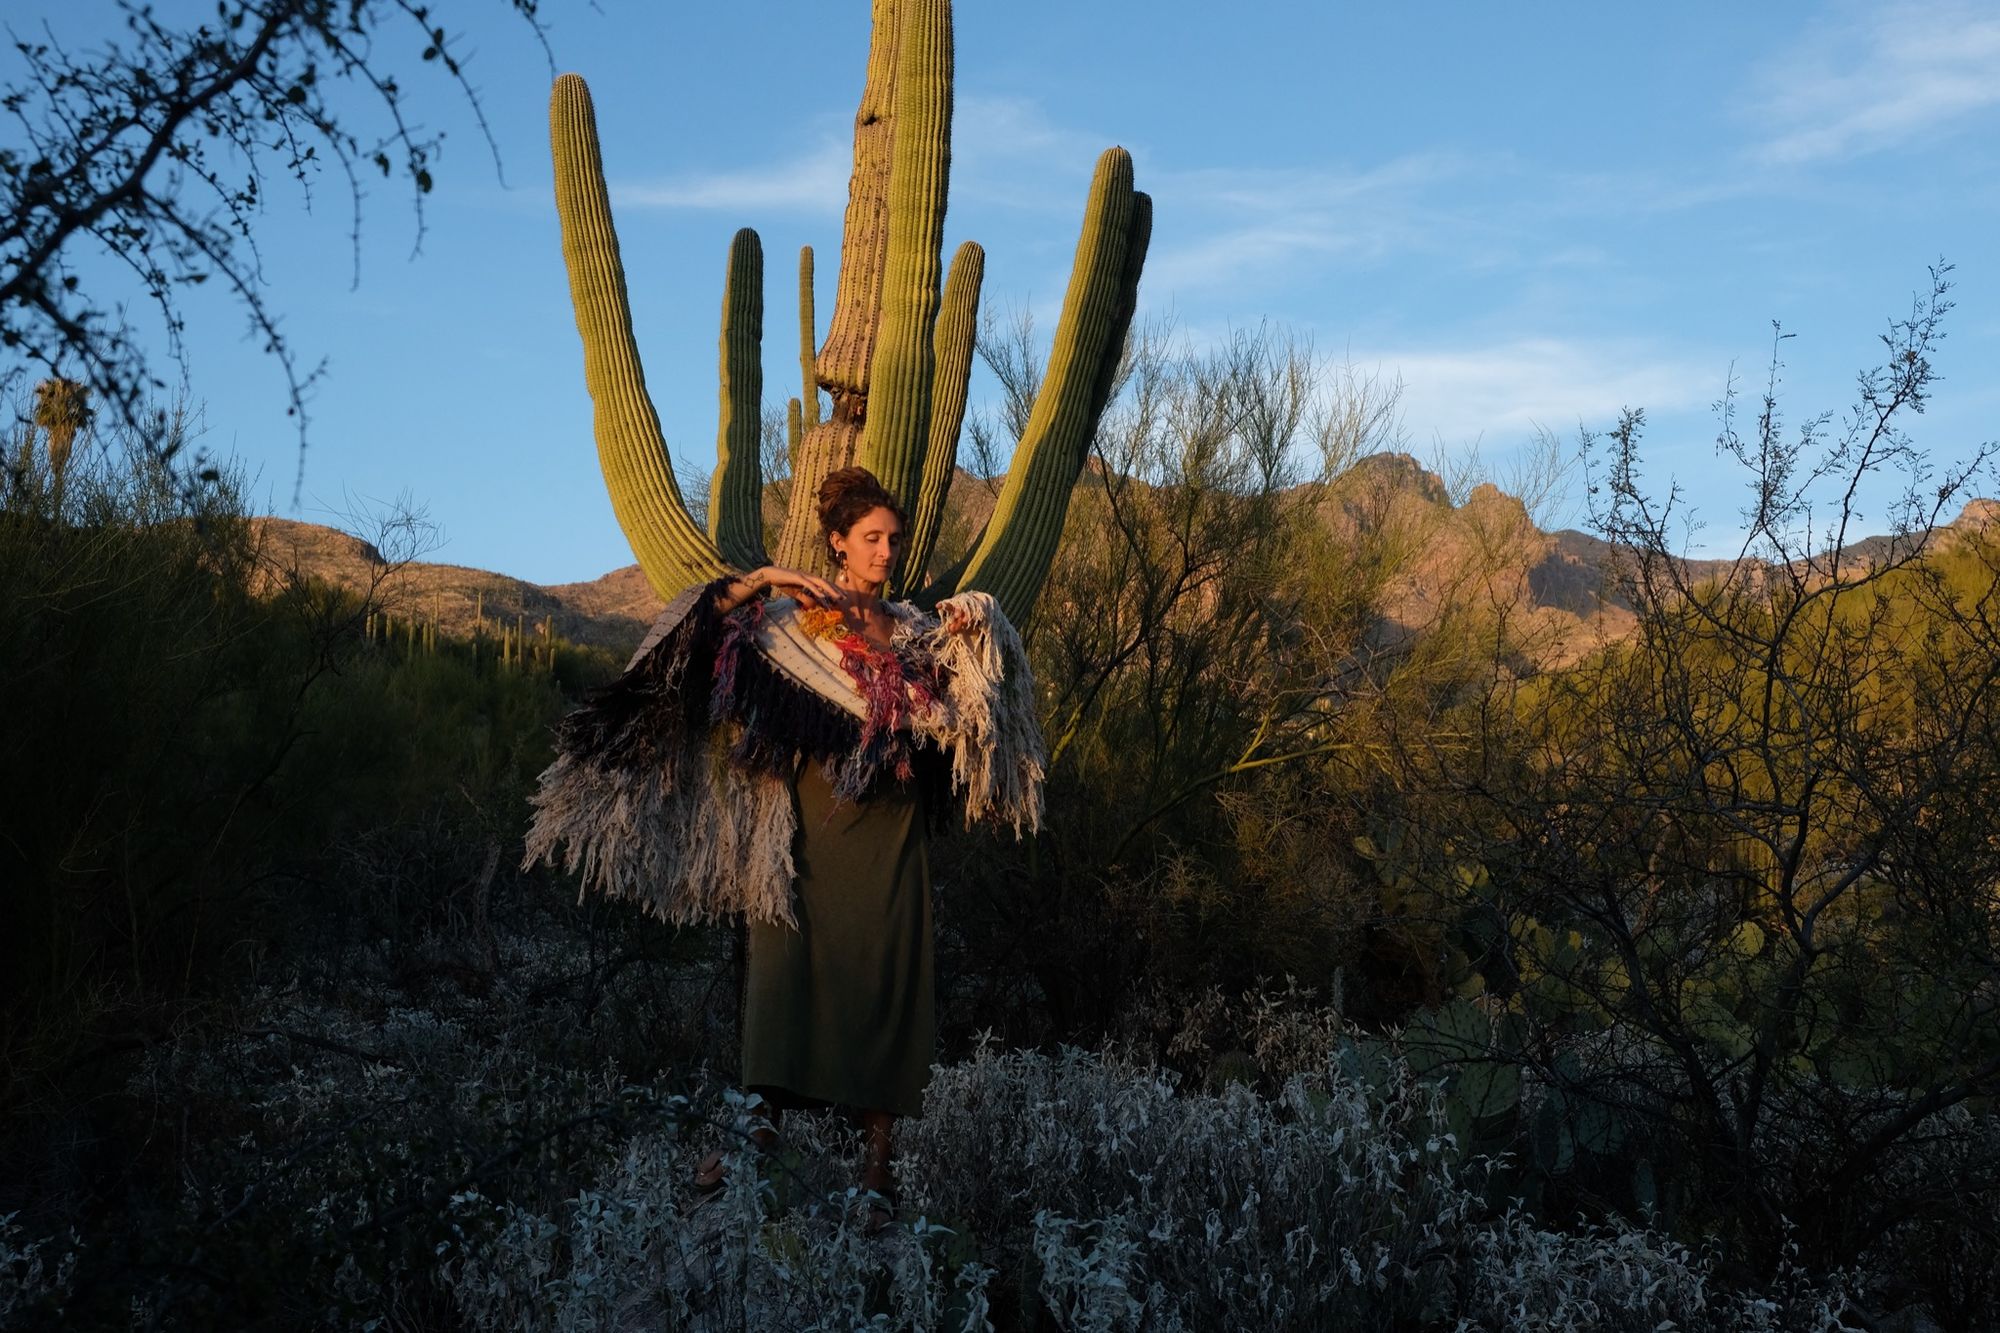 Woman wearing a rainbow, white and brown colored shawl, completely covered in fringe in the desert with cactus and mountains